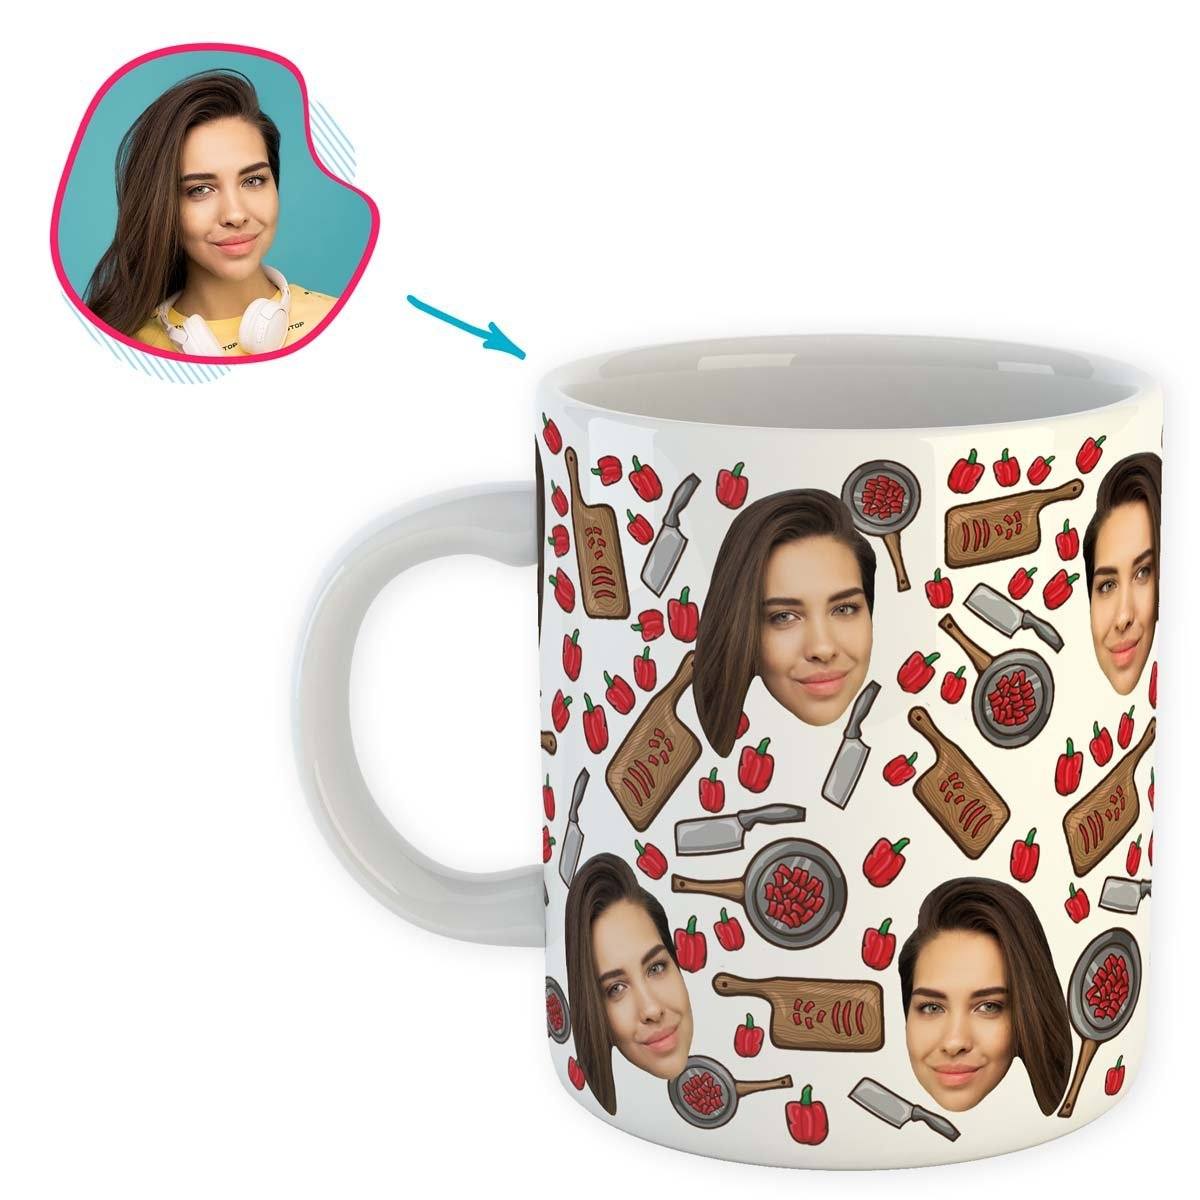 white Сooking mug personalized with photo of face printed on it